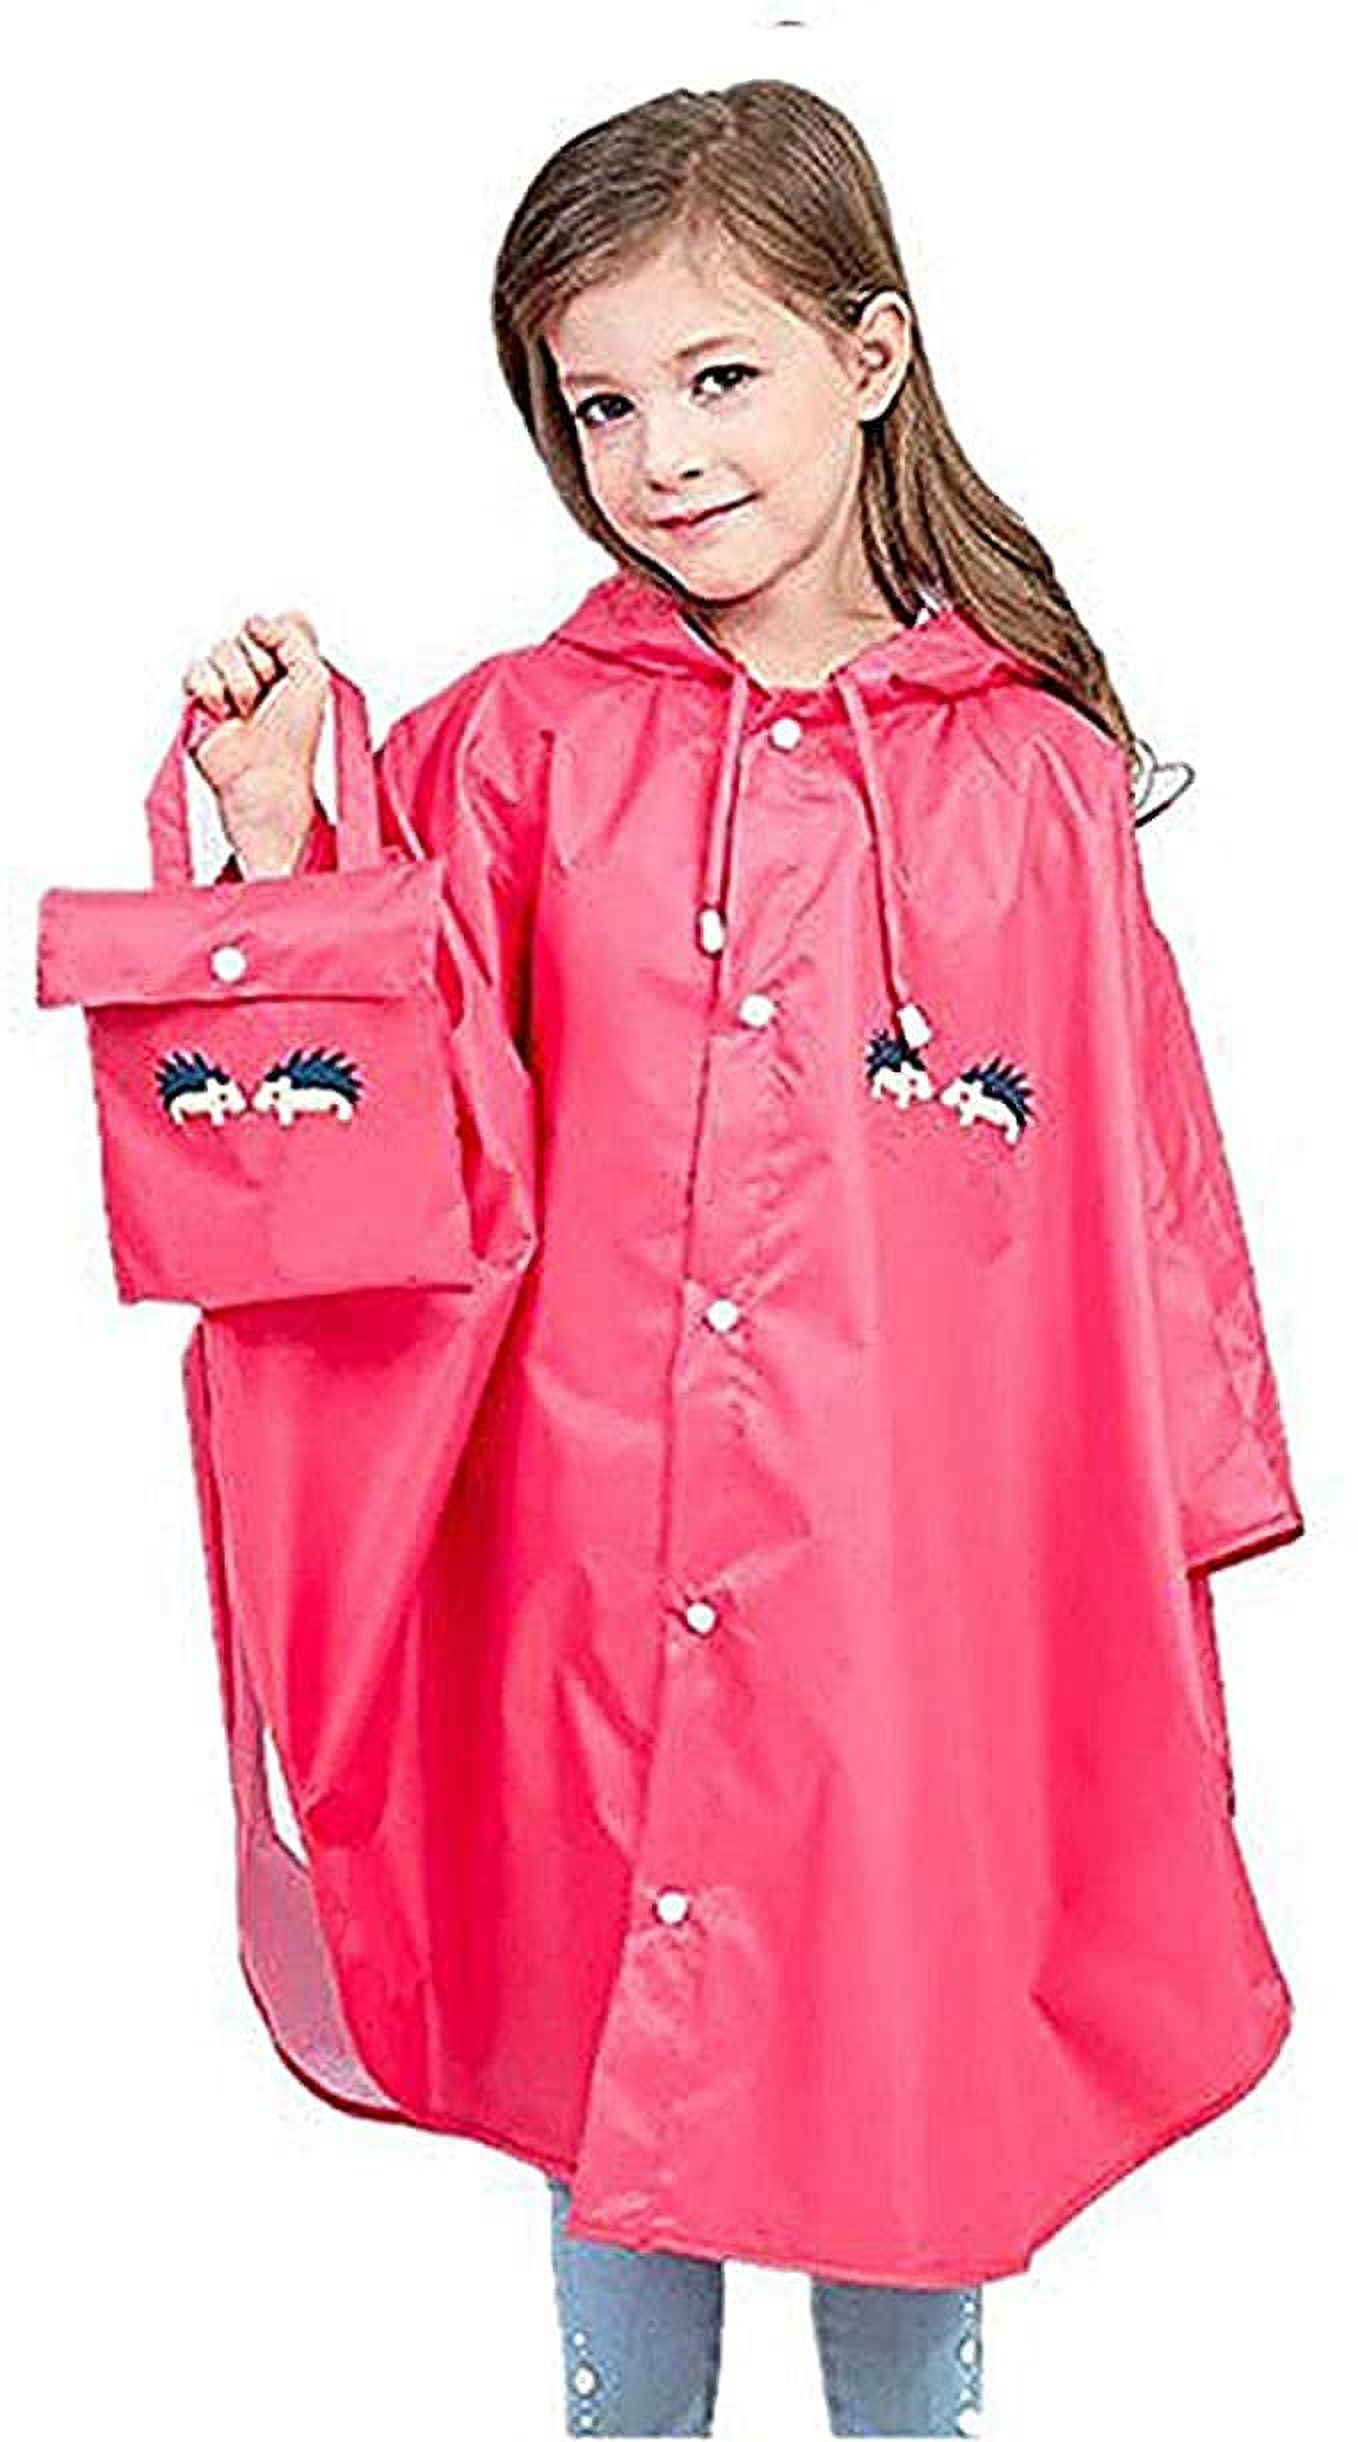 Kids Poncho Hooded Raincoat Durable Waterproof Portable Rain Cape for Boys Girls Rose S - image 1 of 7